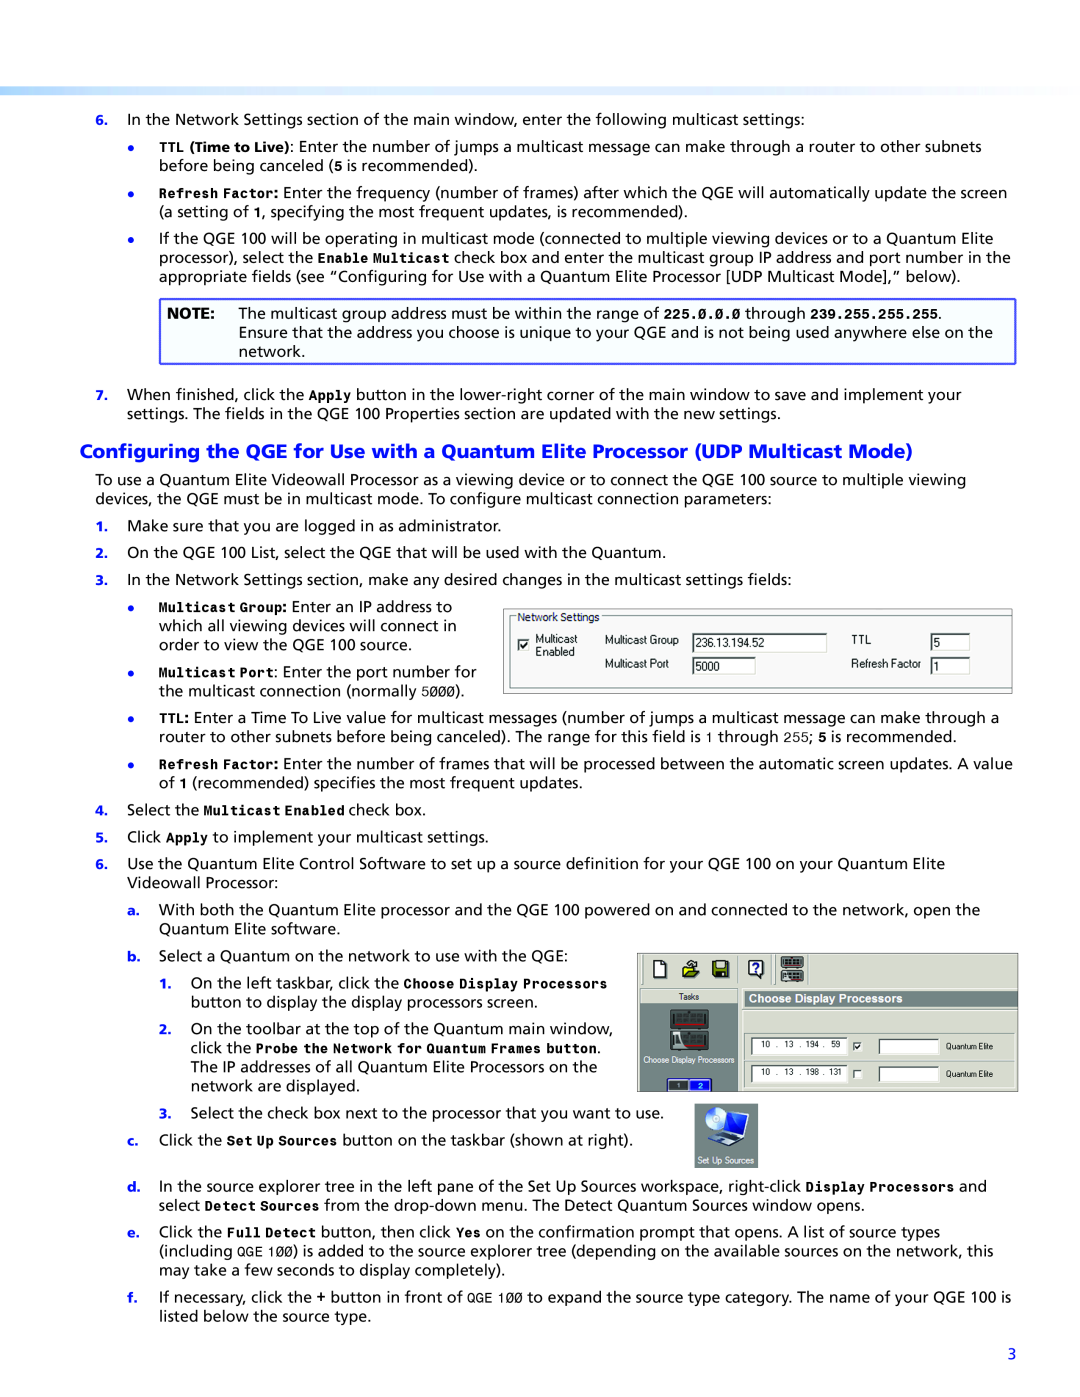 Extron electronic QGE 100 setup guide Select the Multicast Enabled check box 